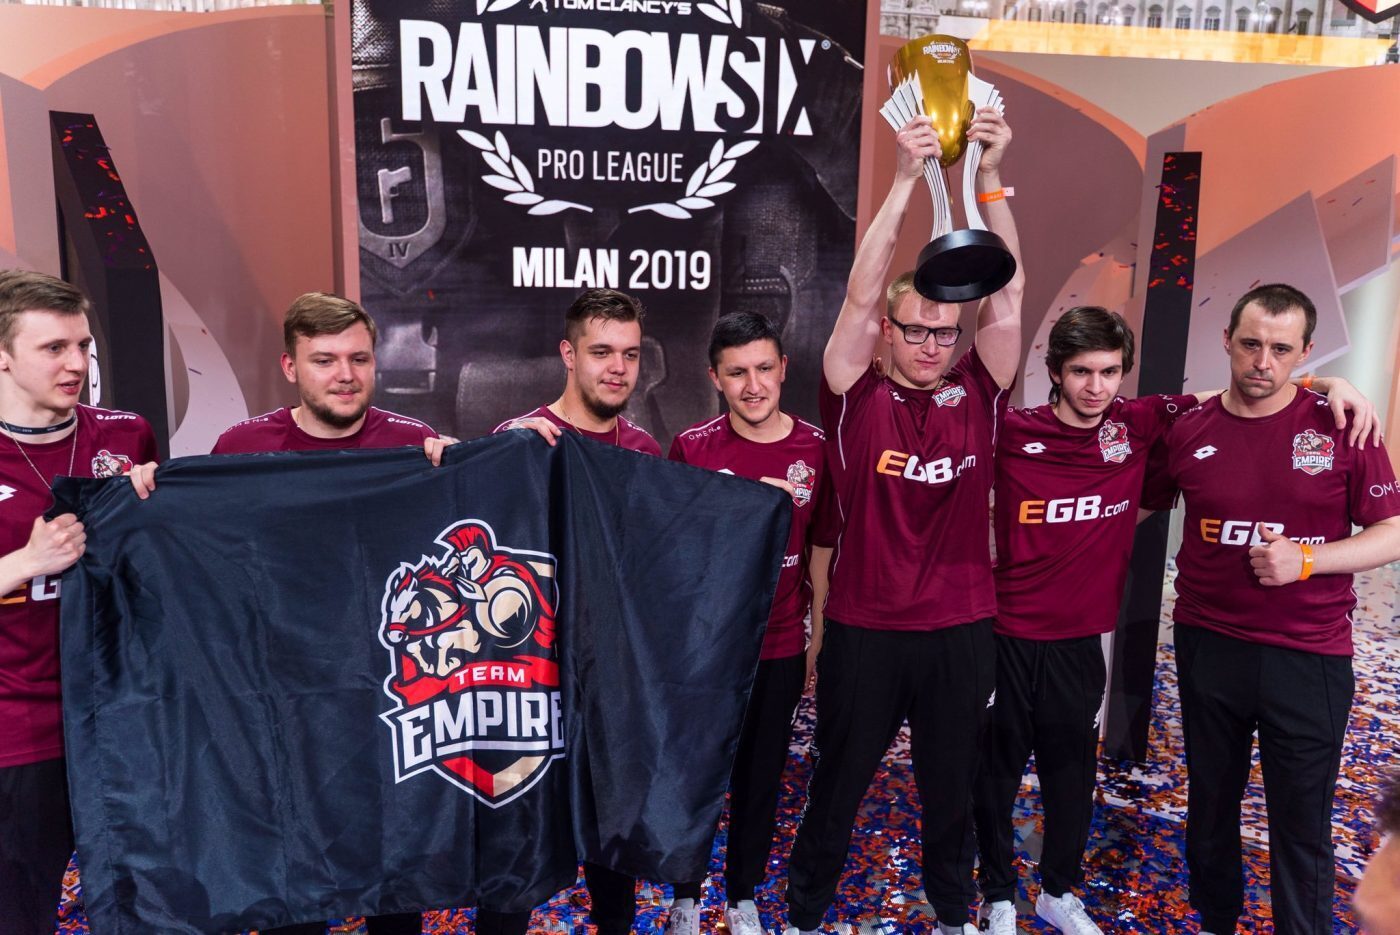 Team Empire finish first at the Rainbow Six Siege Season 9 finals in Italy. (Image courtesy of Team Empire)